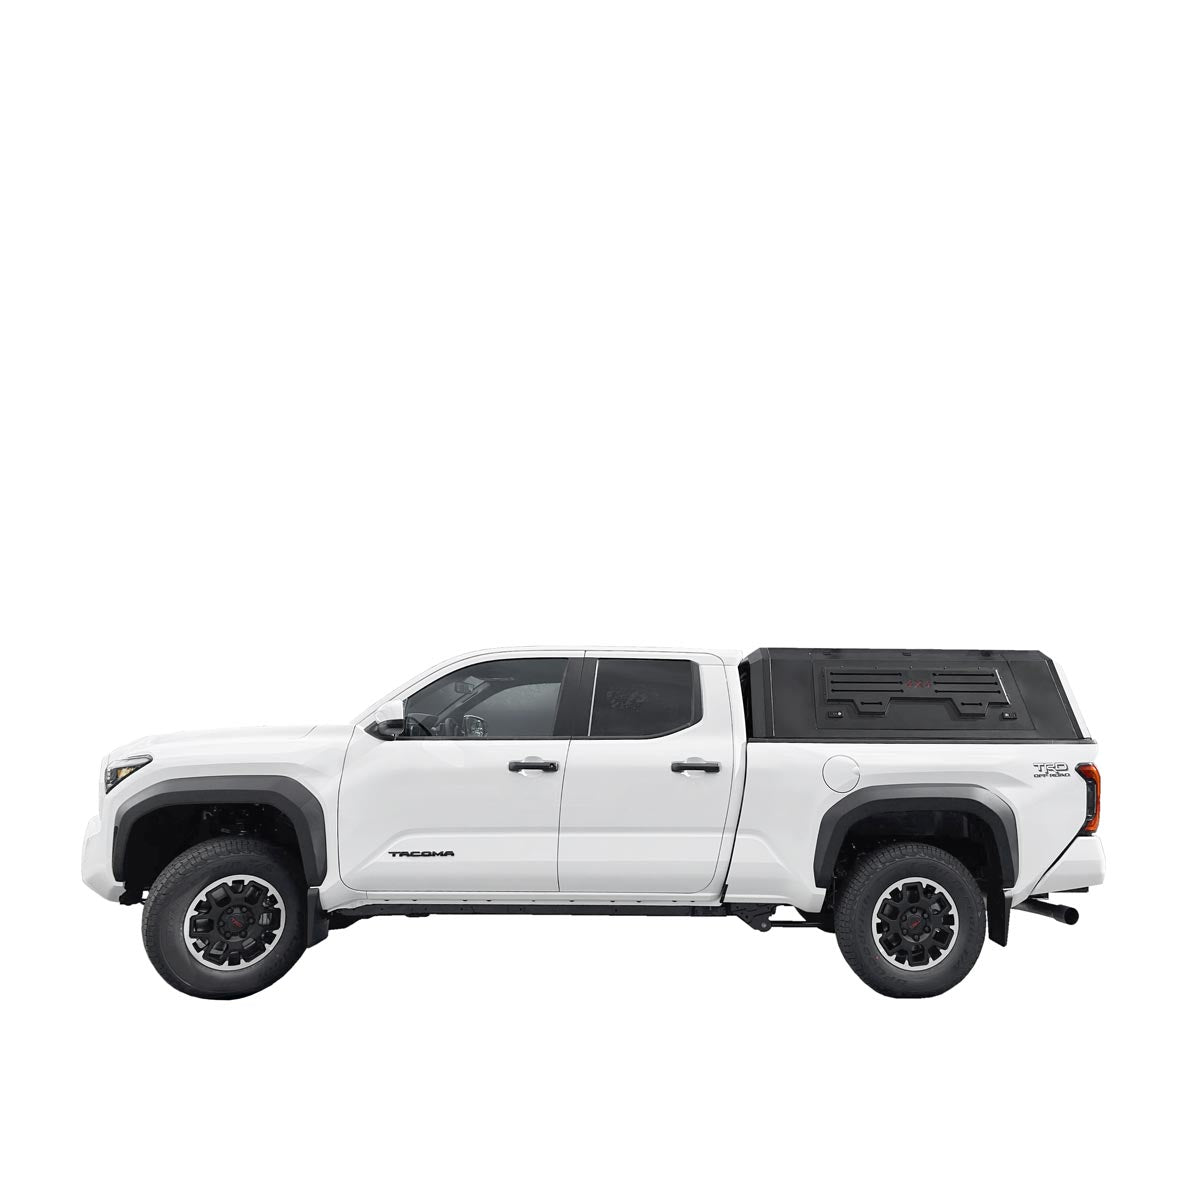 LOADED Truck Cap for Toyota Tacoma 2005-2015